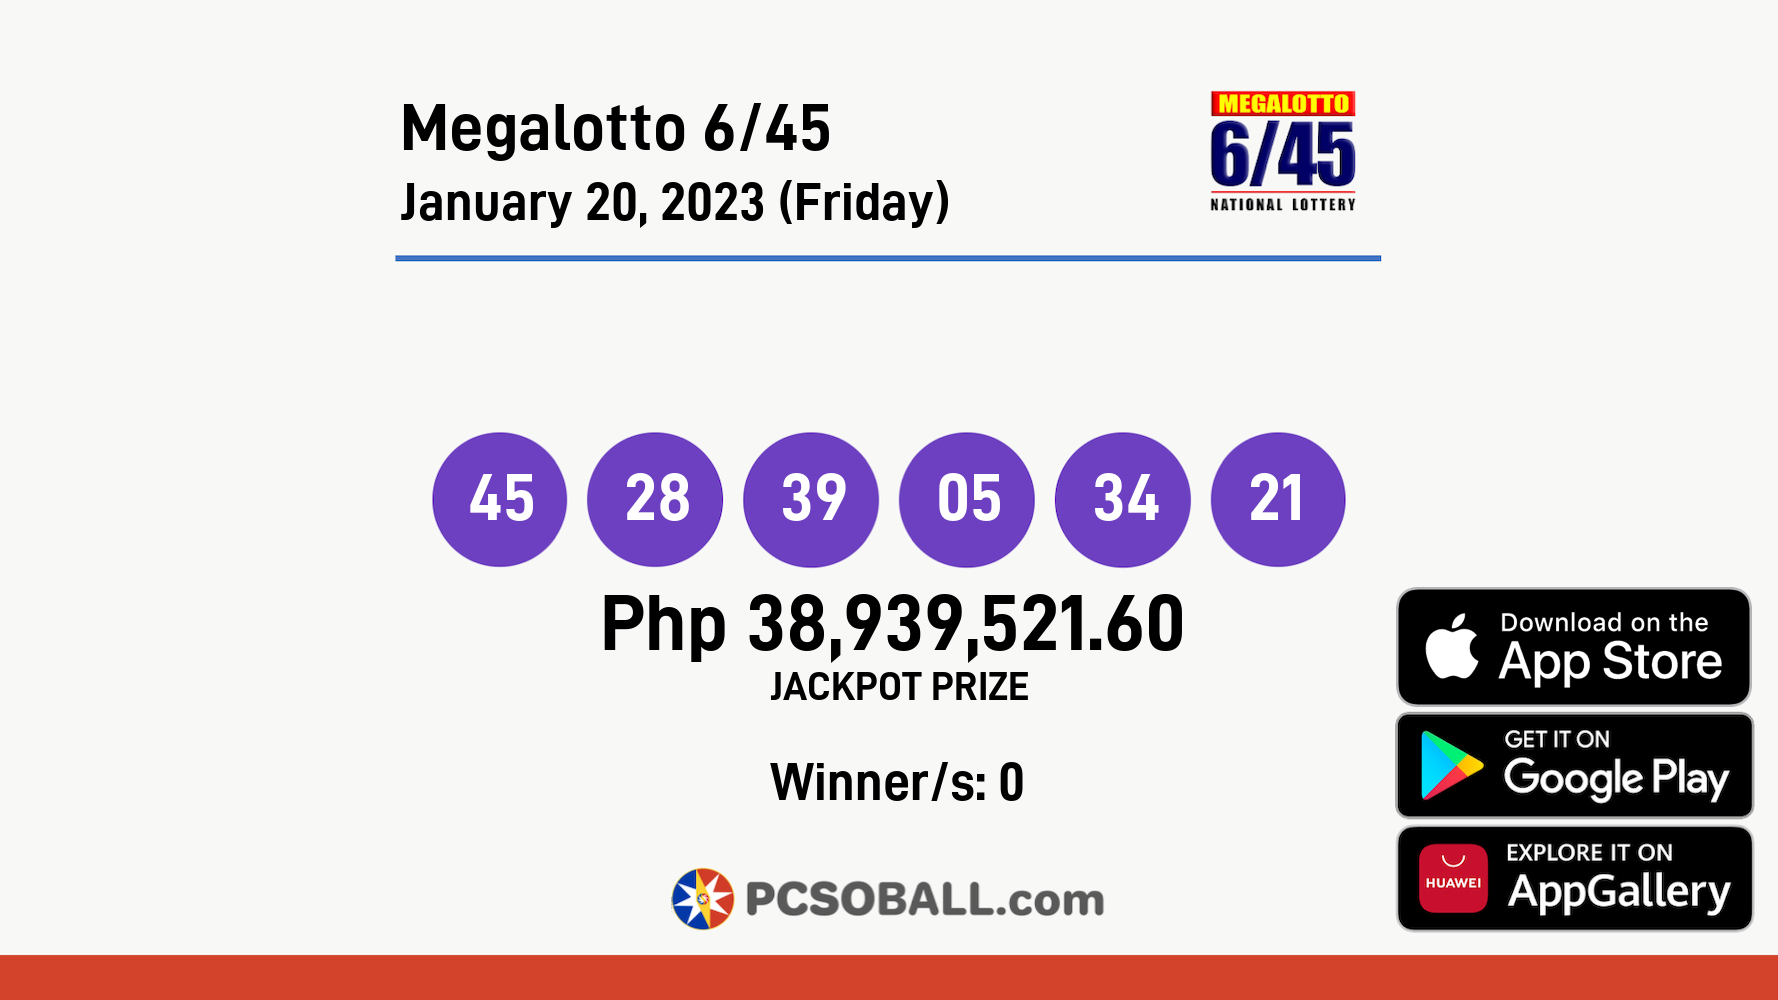 Megalotto 6/45 January 20, 2023 (Friday) Result